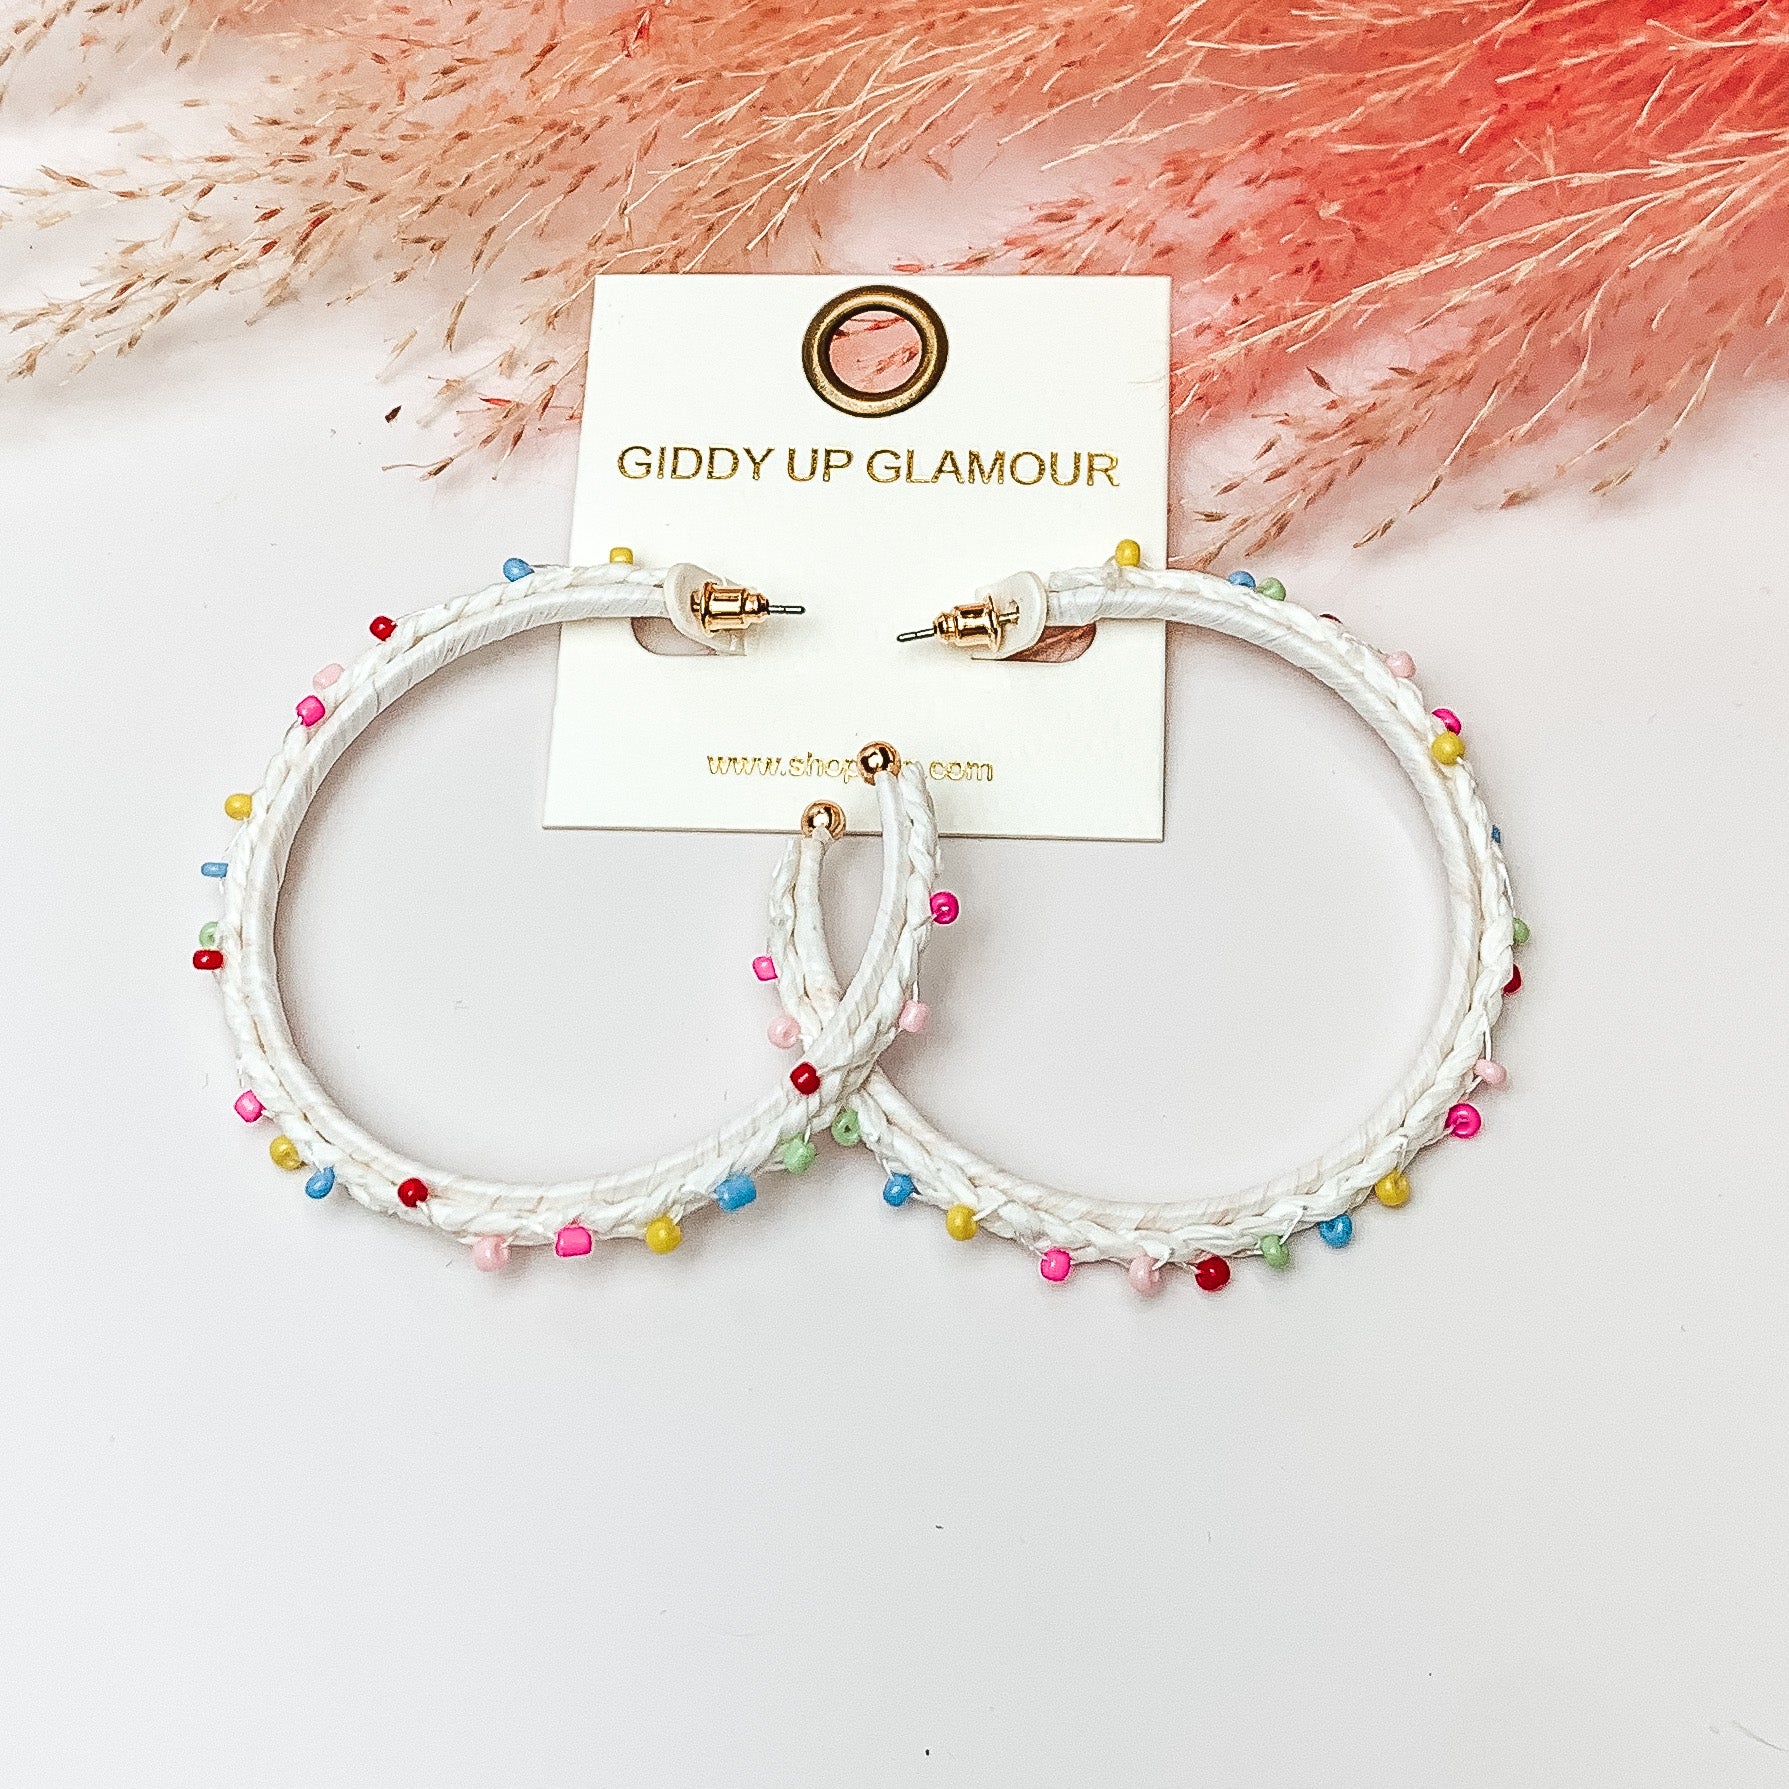 Pictured are raffia braided hoop earrings in white with colorful beads. They are pictured with a pink feather on a white background.